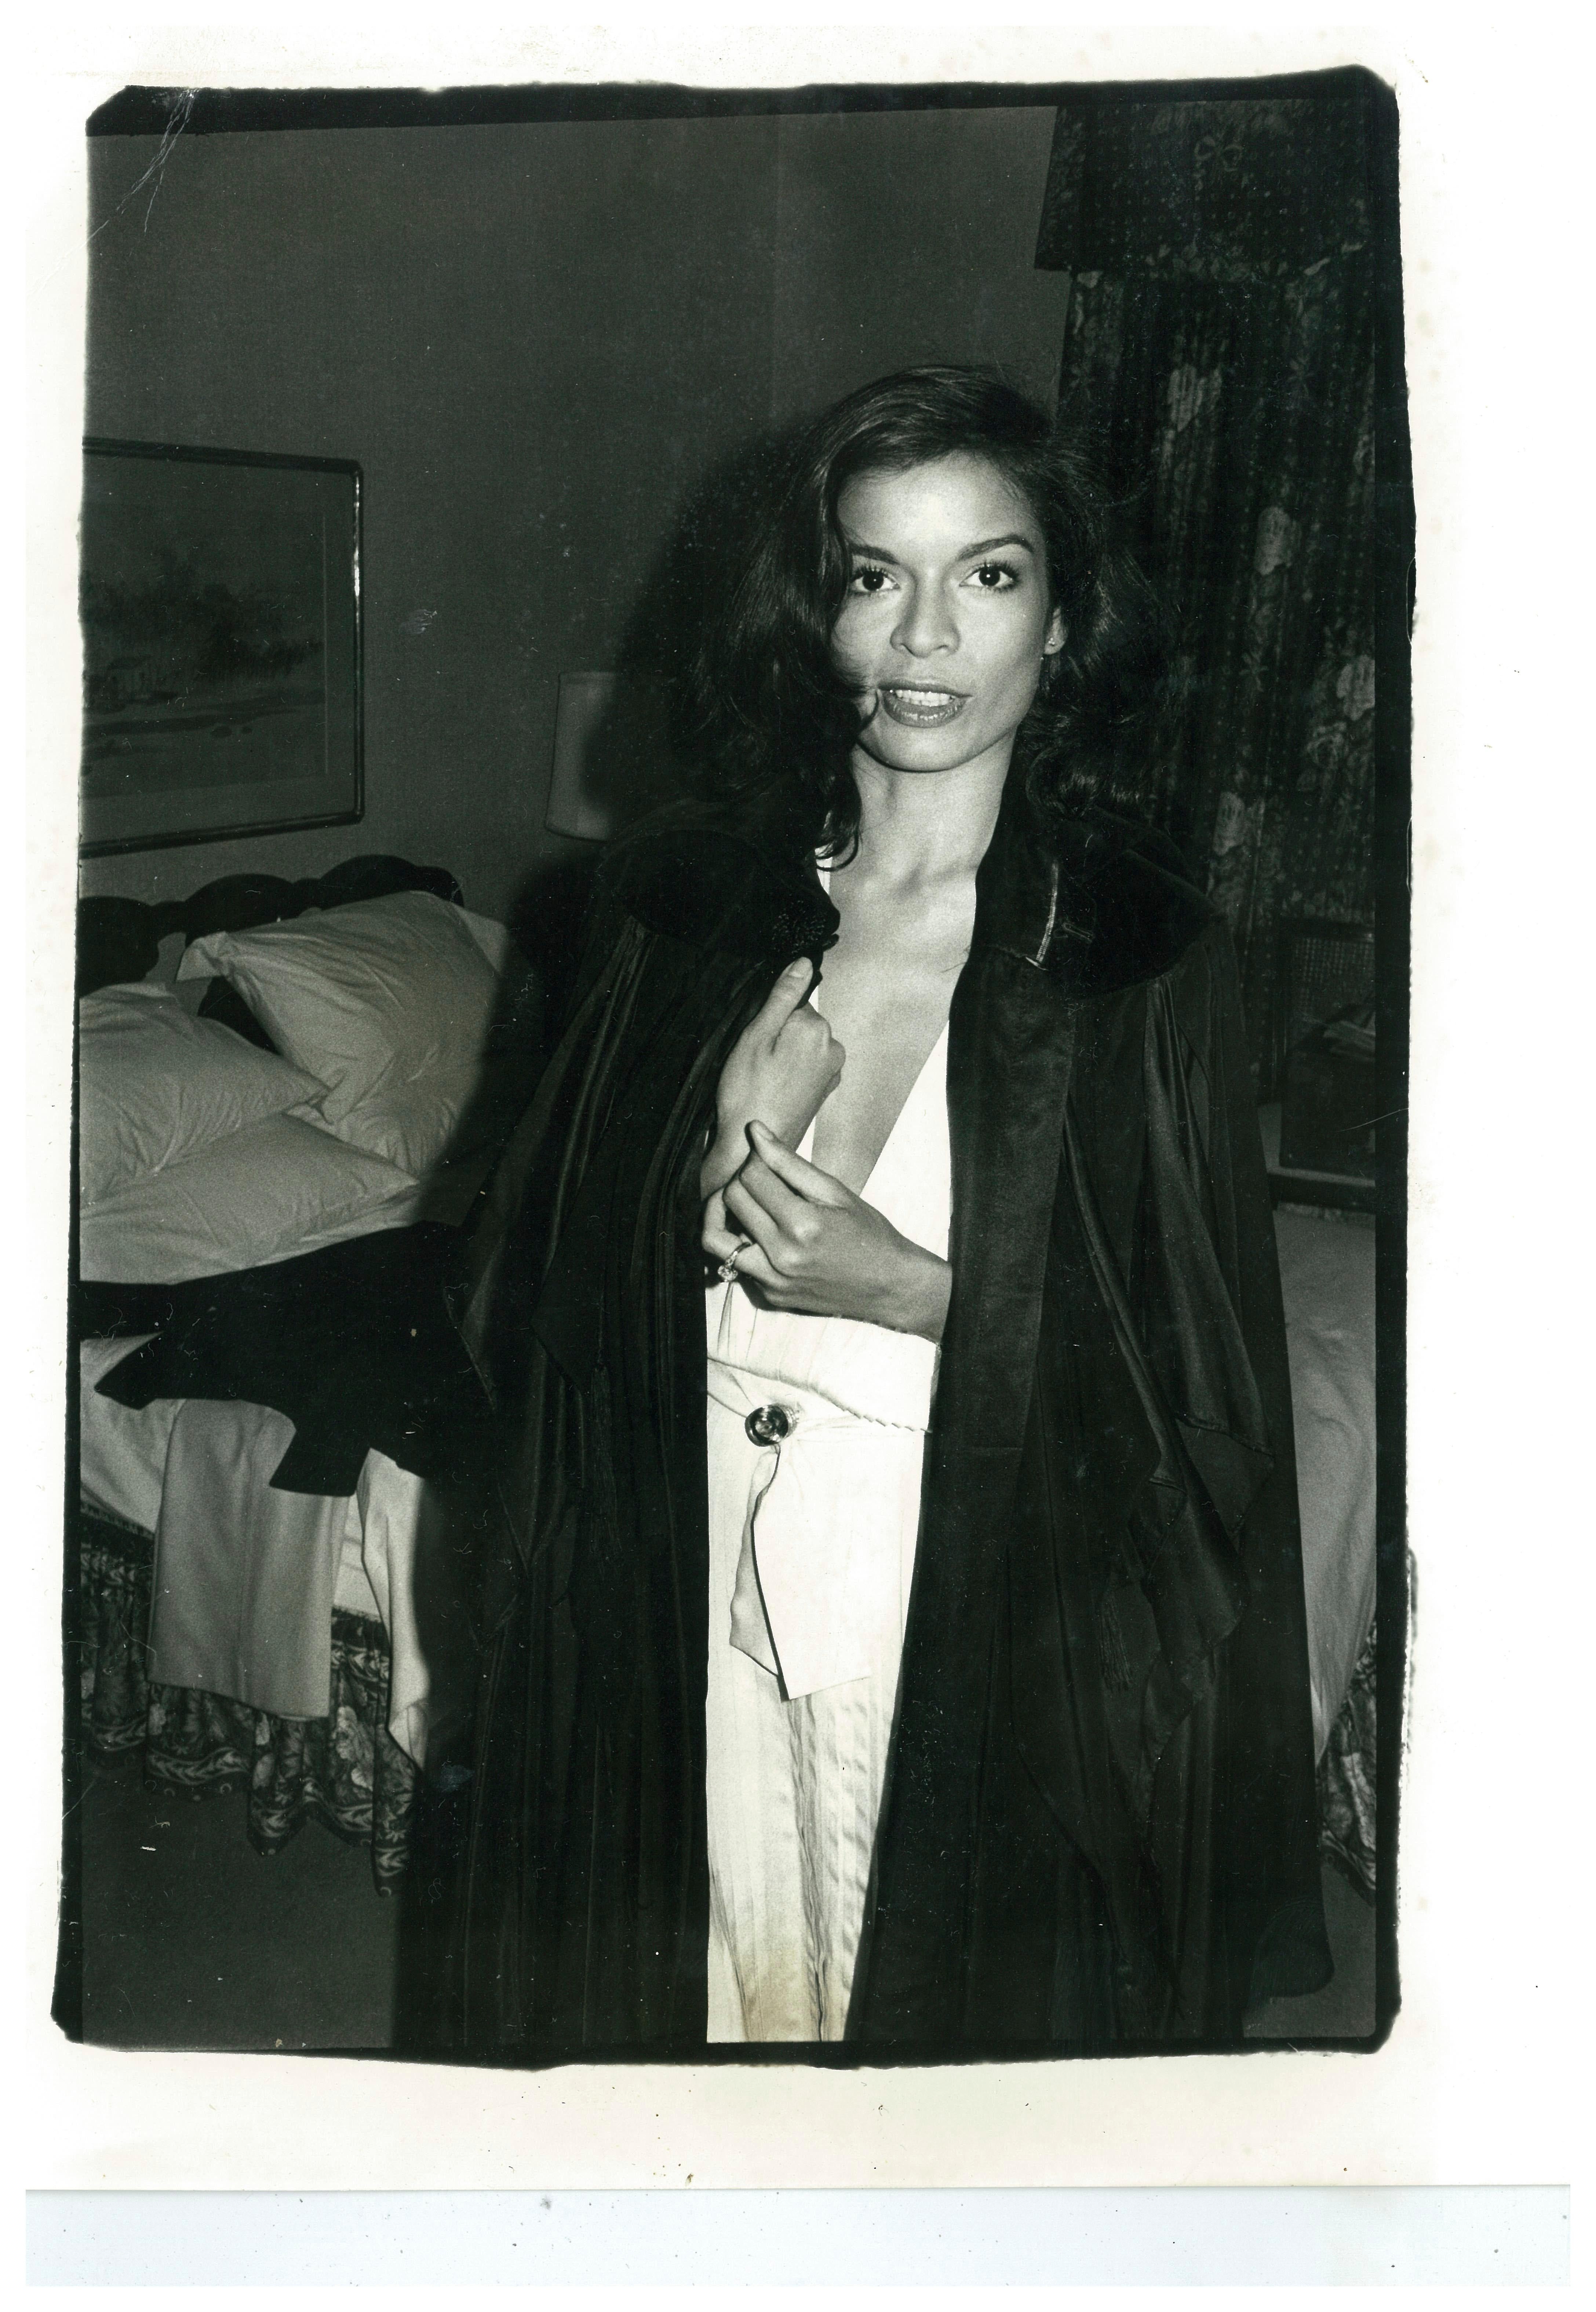 Andy Warhol Portrait Photograph - Bianca Jagger in black coat in Hotel Room